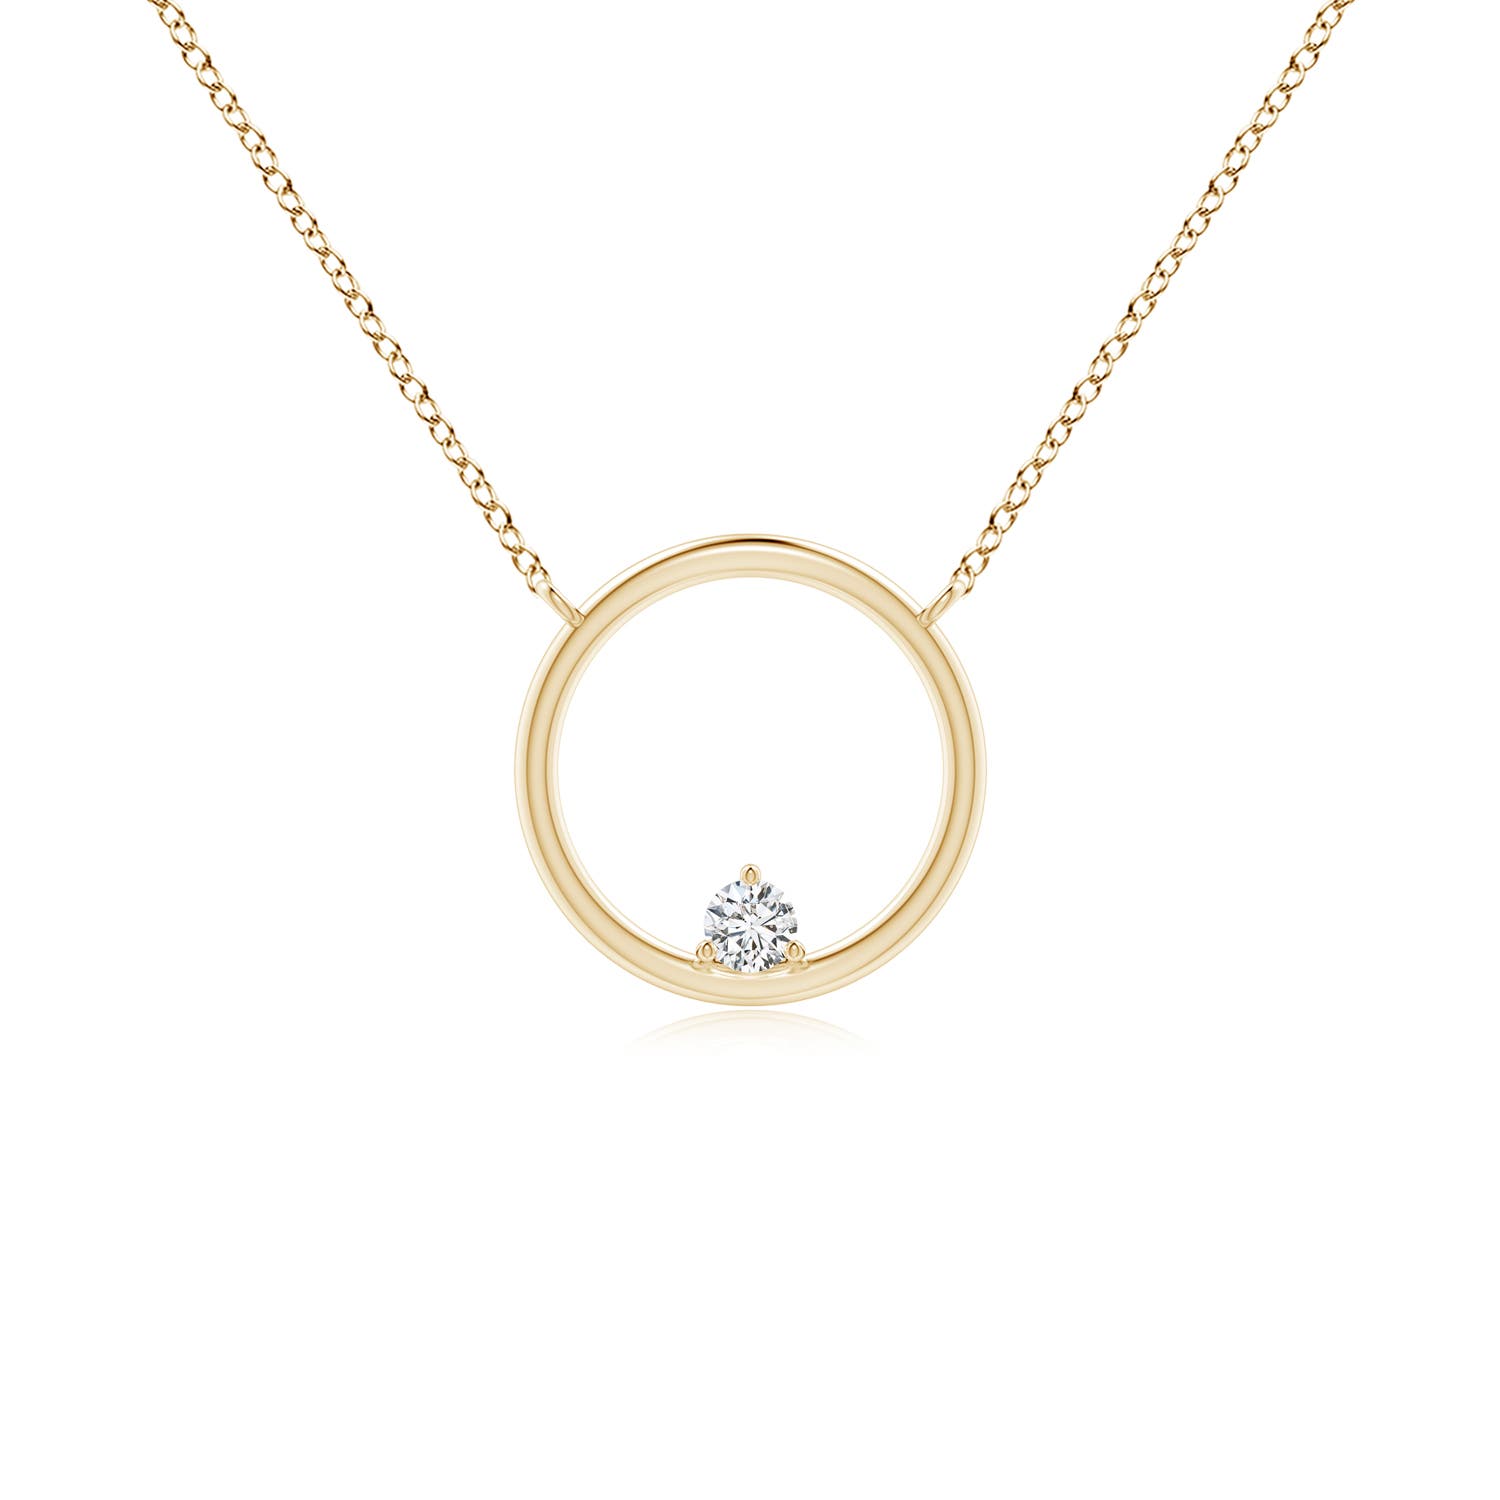 H, SI2 / 0.07 CT / 14 KT Yellow Gold